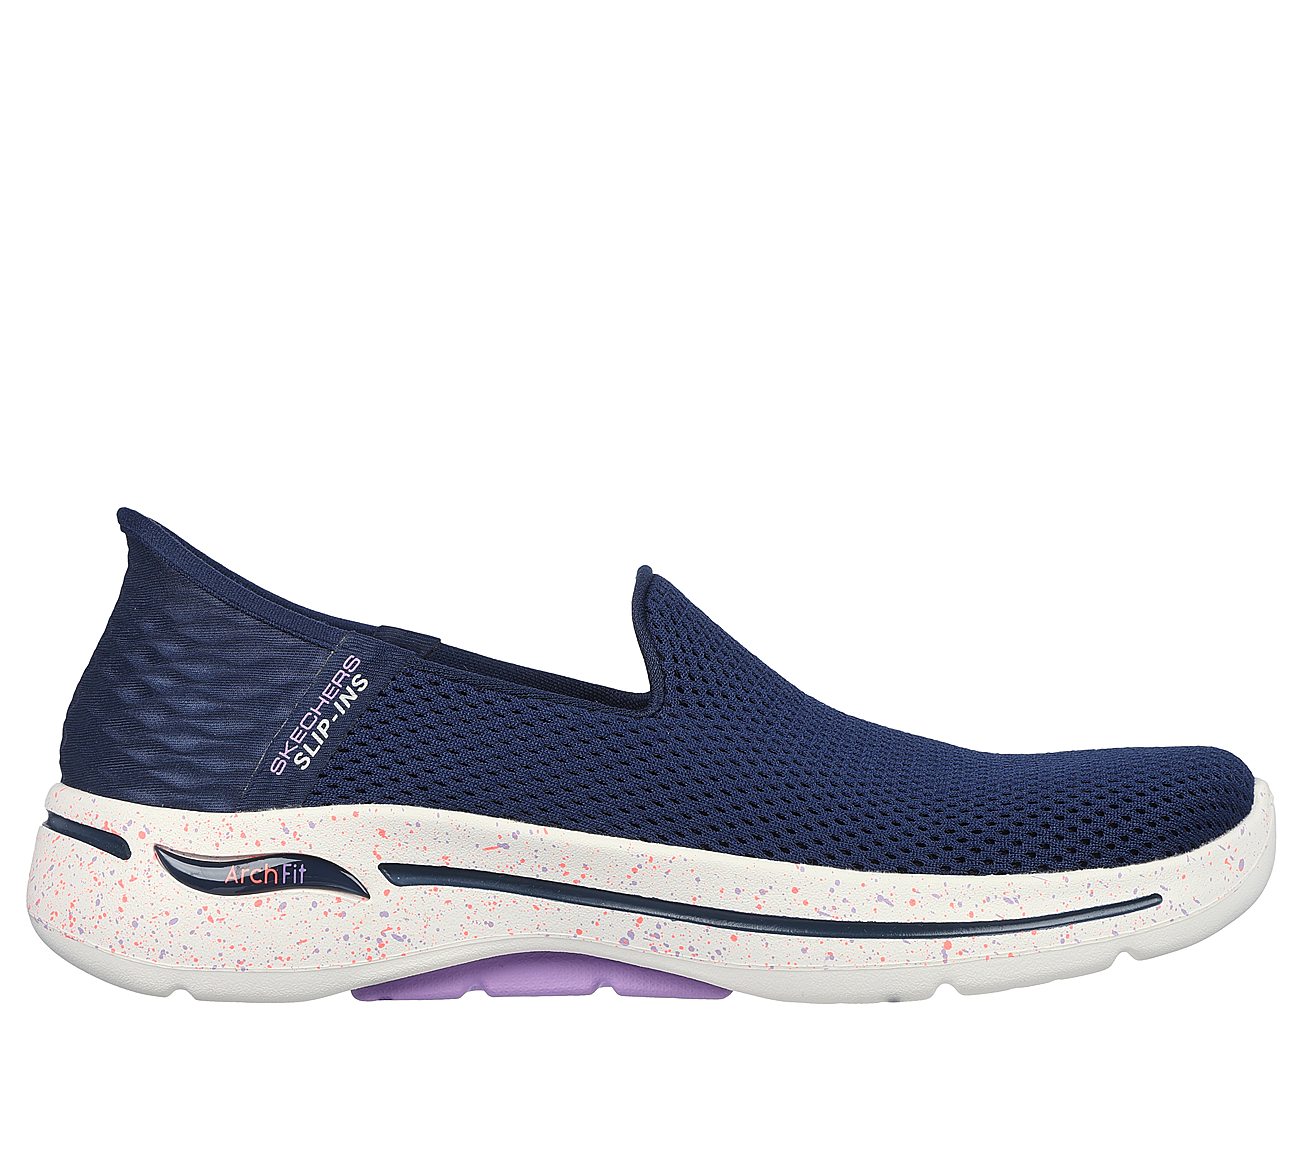 GO WALK ARCH FIT, NAVY/LAVENDER Footwear Lateral View